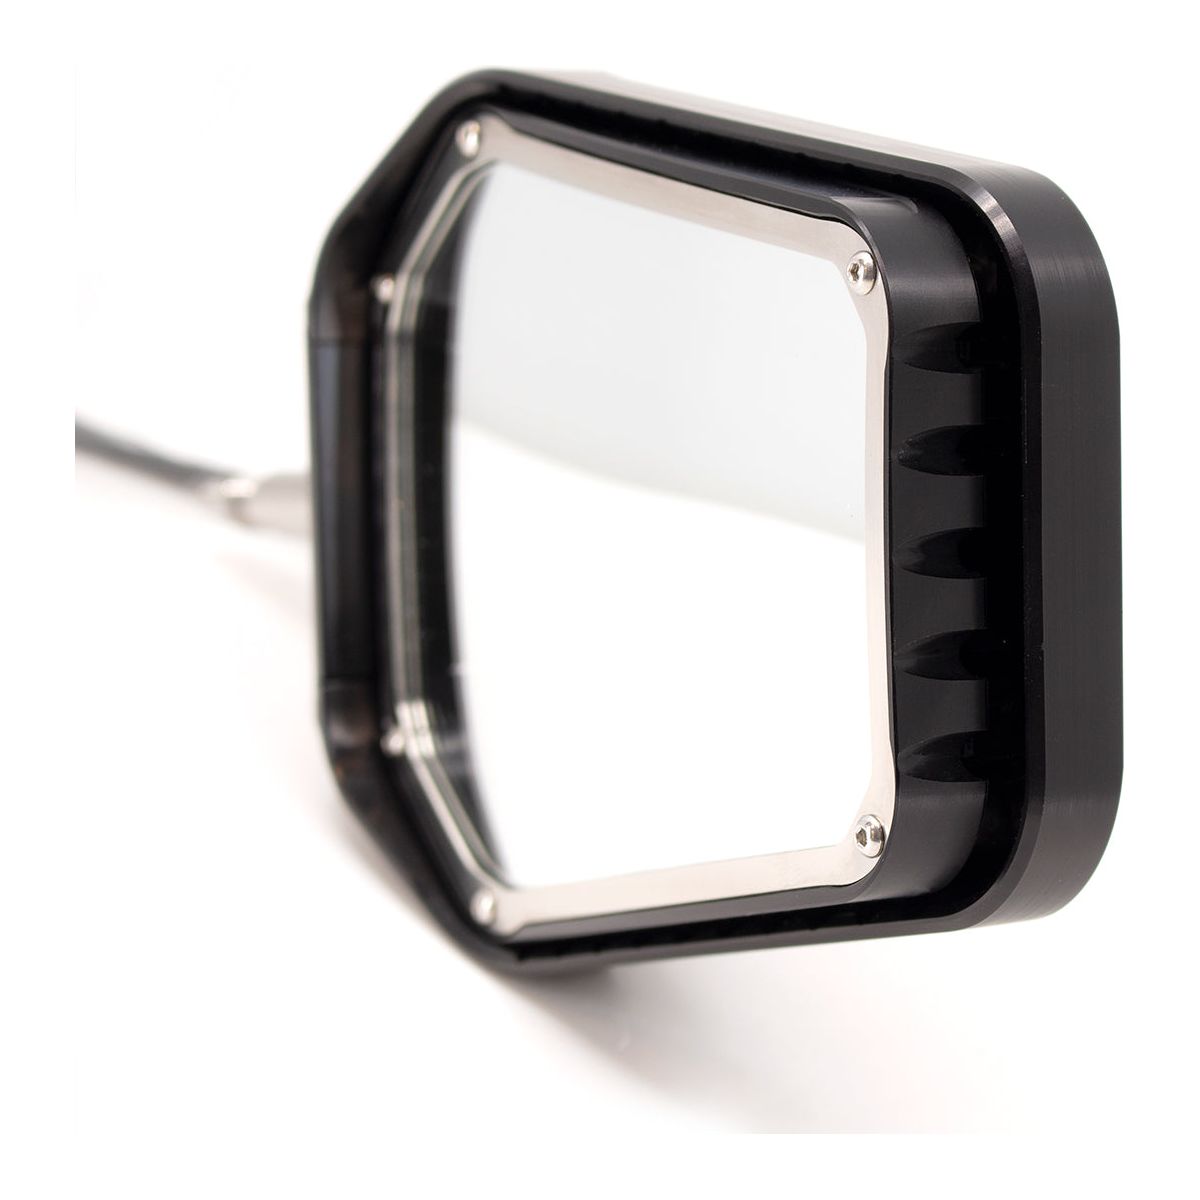 PRIZM LED LIGHTED MIRRORS WITH INFINITY MOUNTS-Side Mirrors-Sector Seven-Black Market UTV